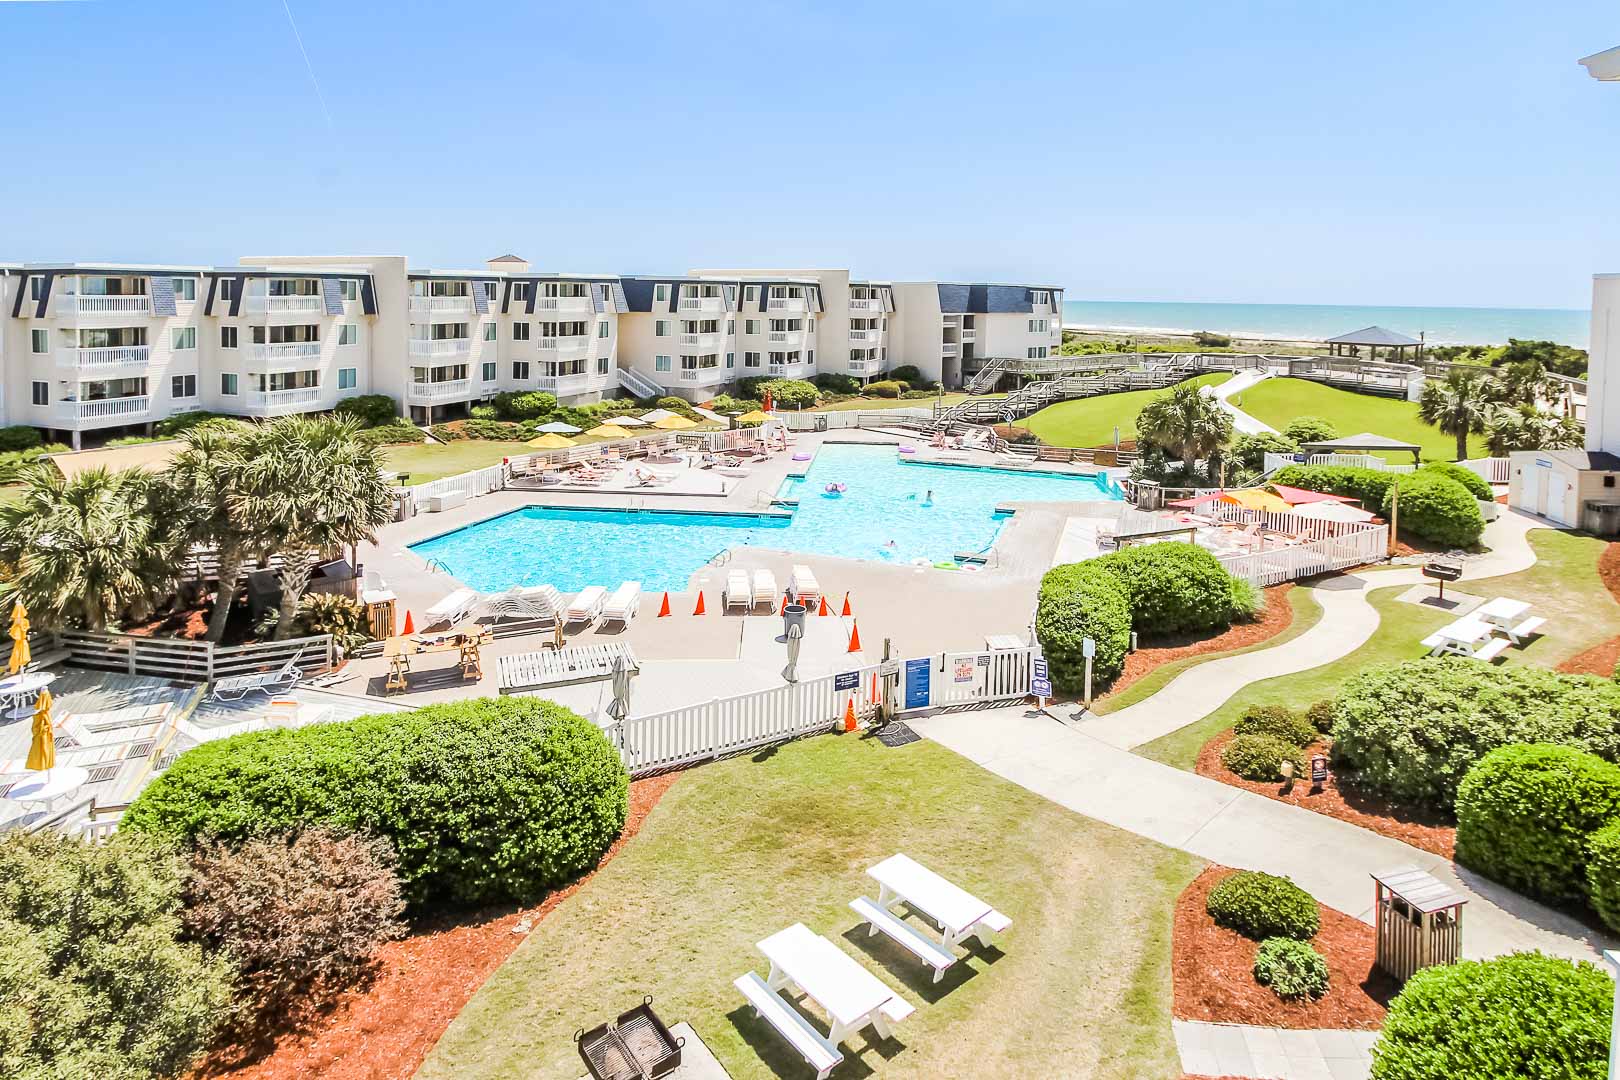 A lovely resort view of at VRI's A Place at the Beach III in North Carolina